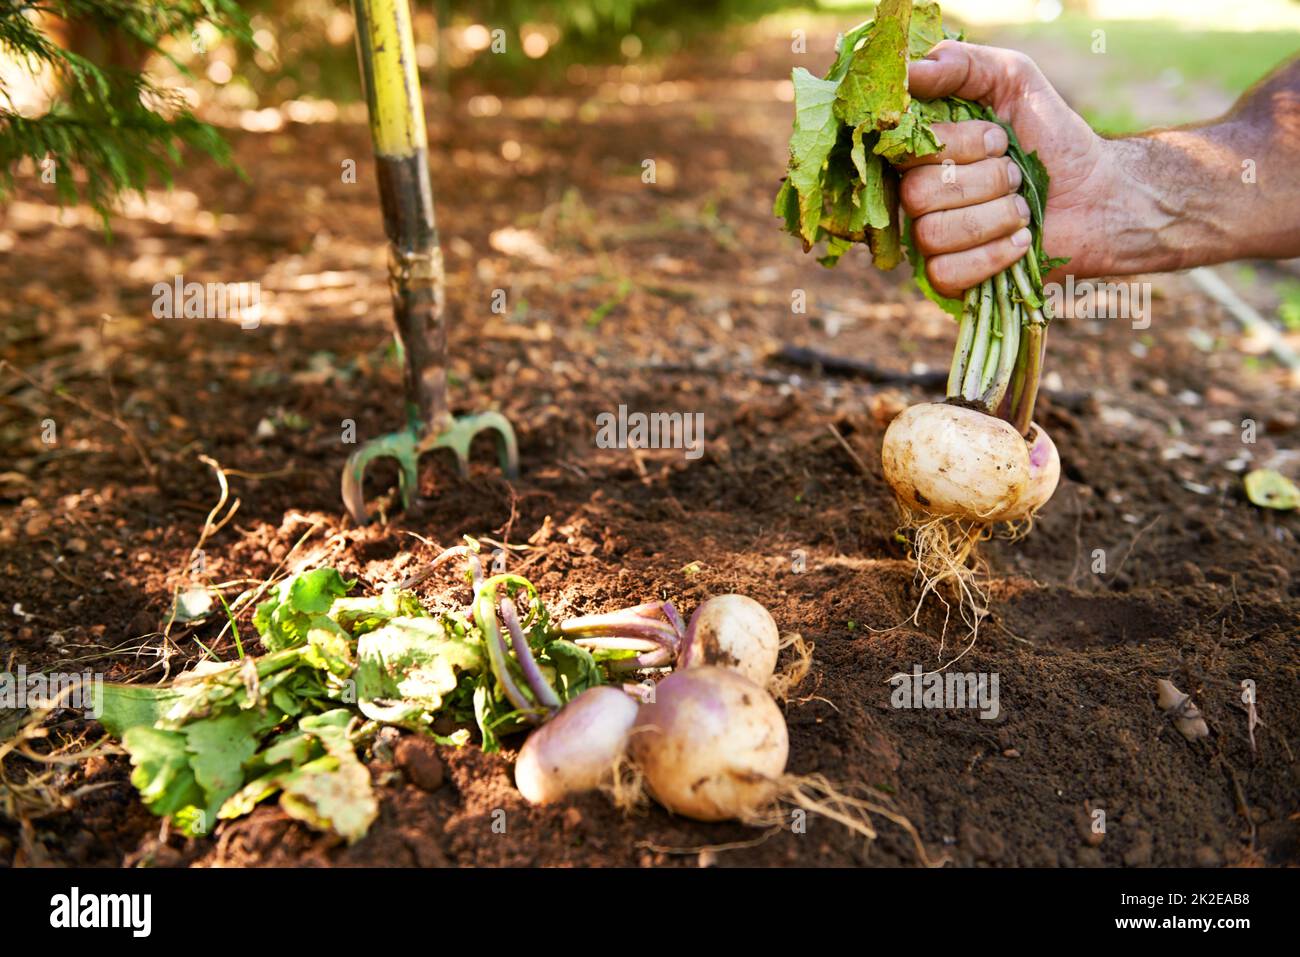 Straight from the ground. Turnips being pulled from the earth. Stock Photo